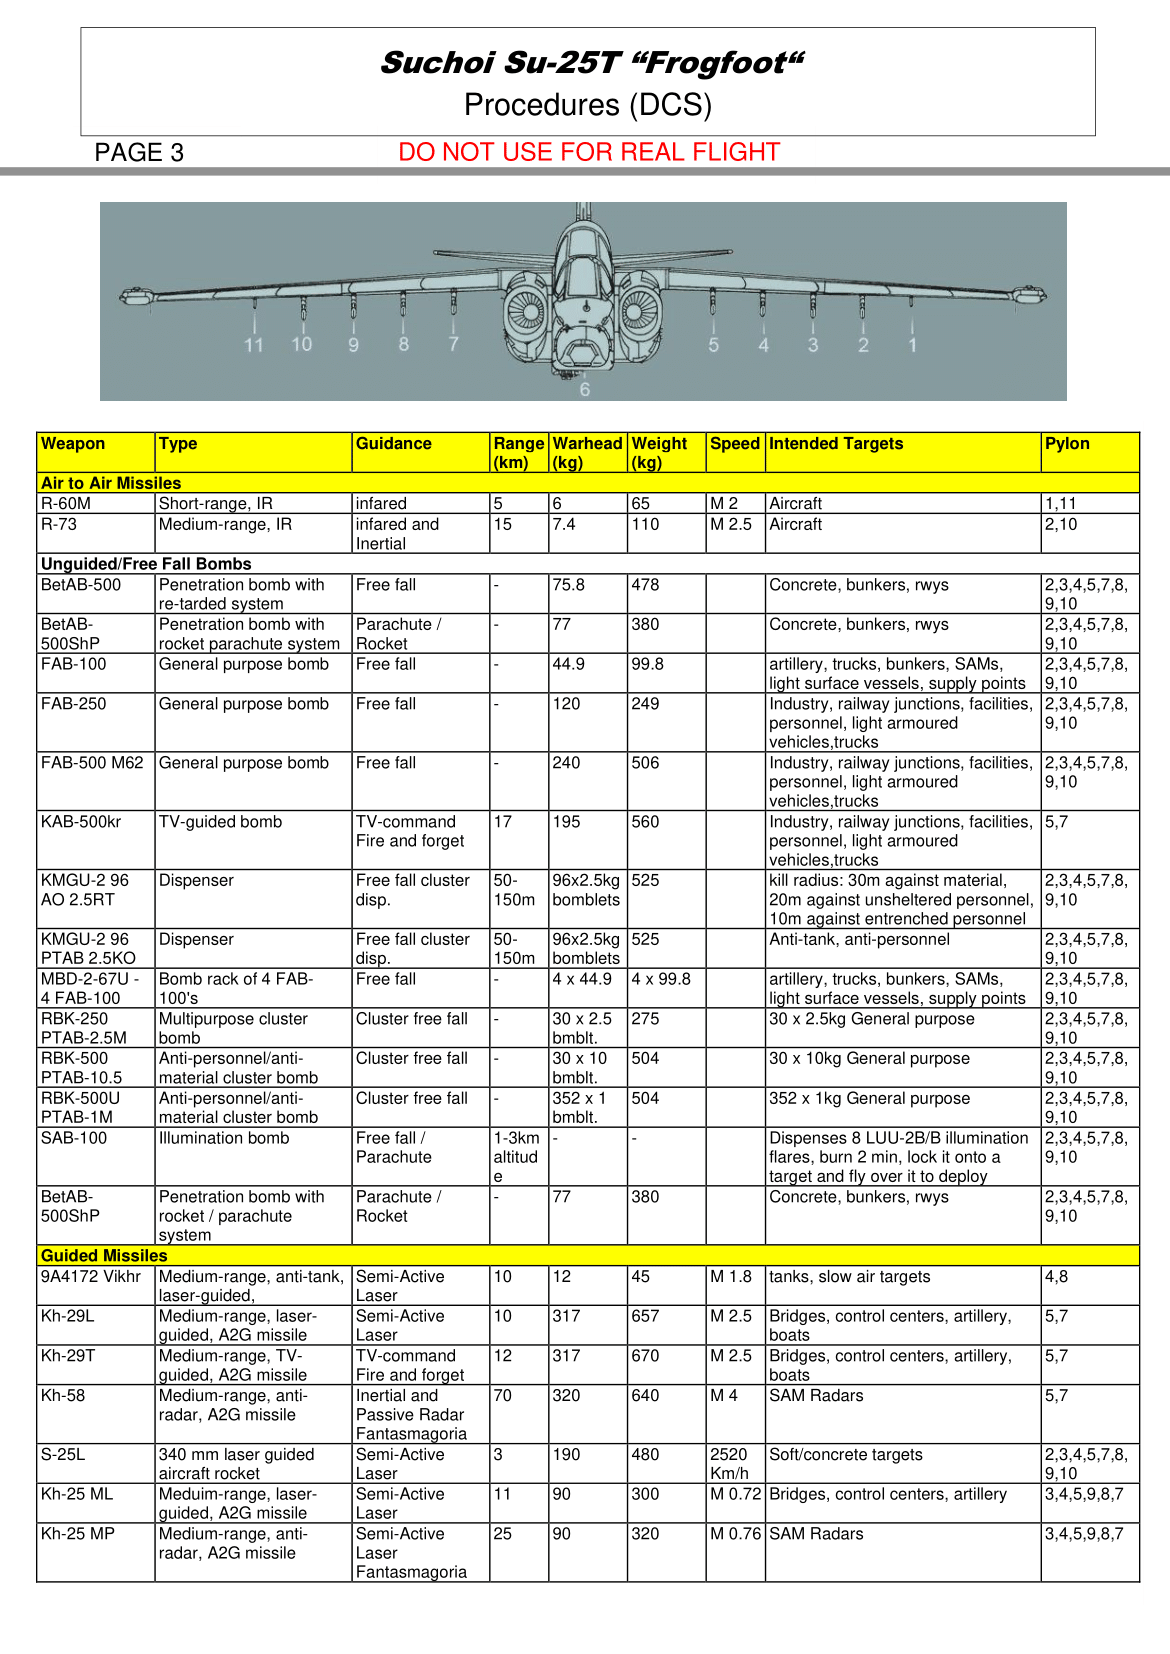 DCS SU-25T Flying Guide image 4